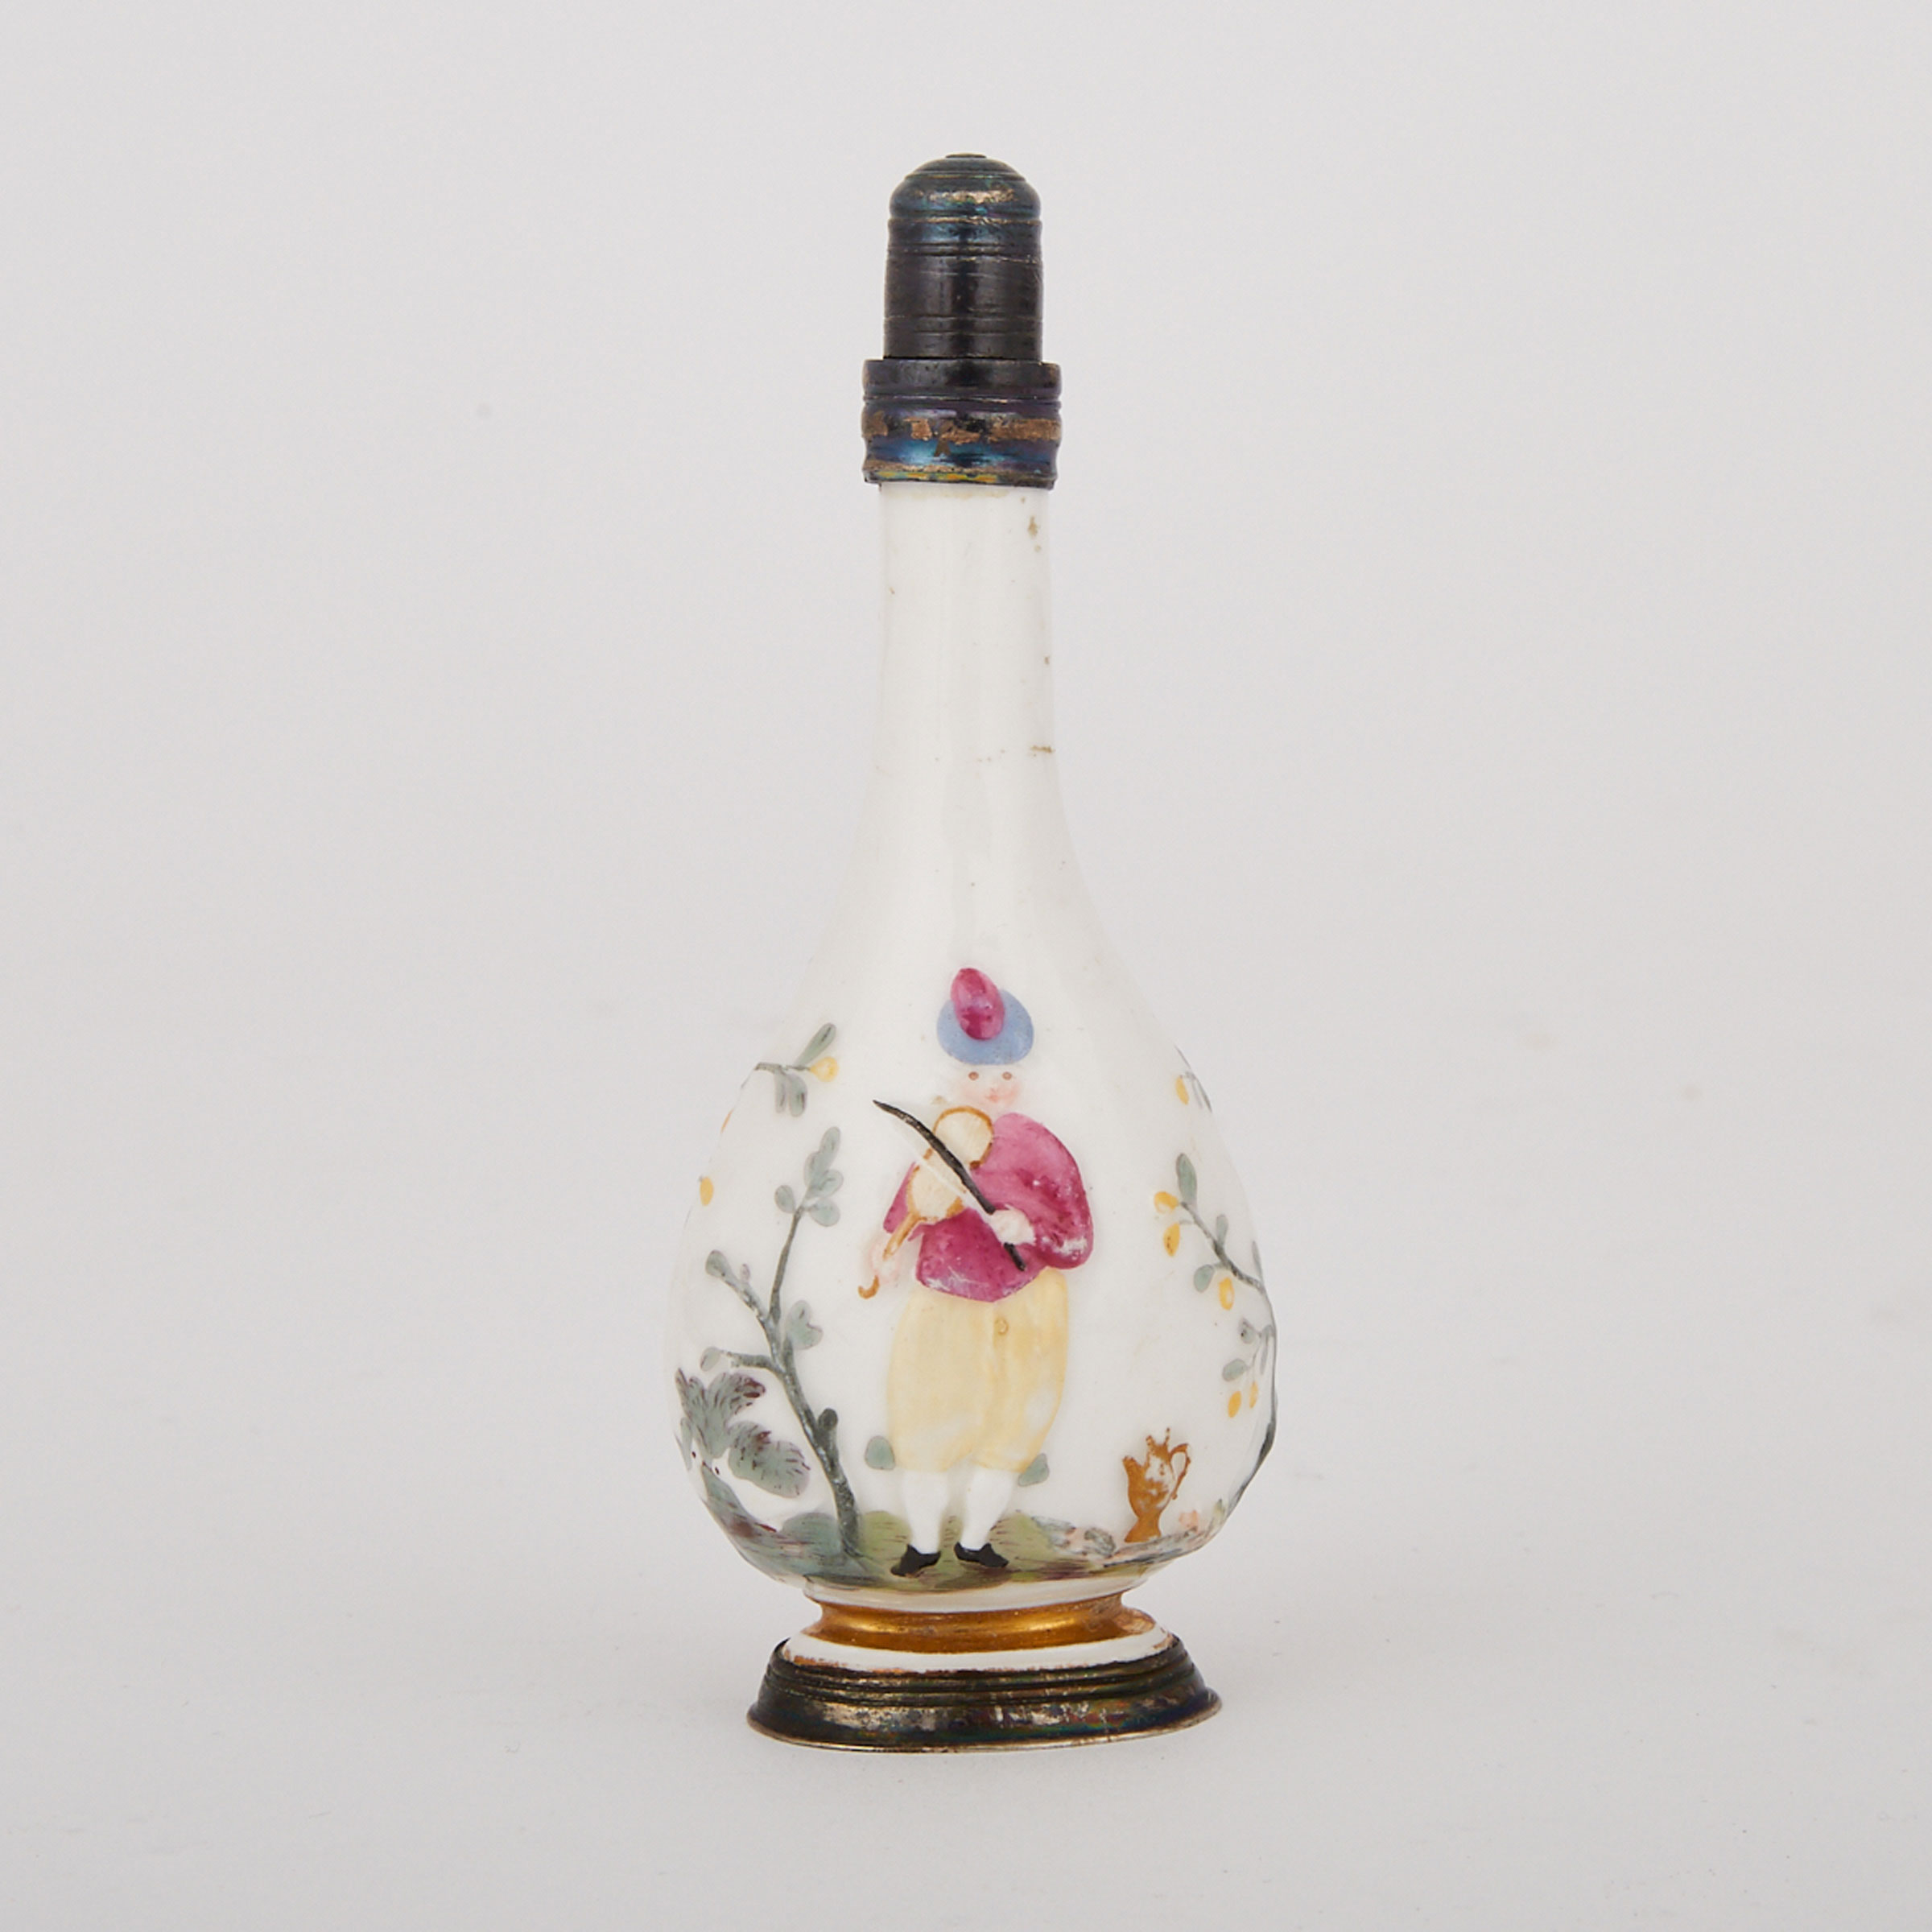 Continental Porcelain Scent Bottle, probably German, 18th century